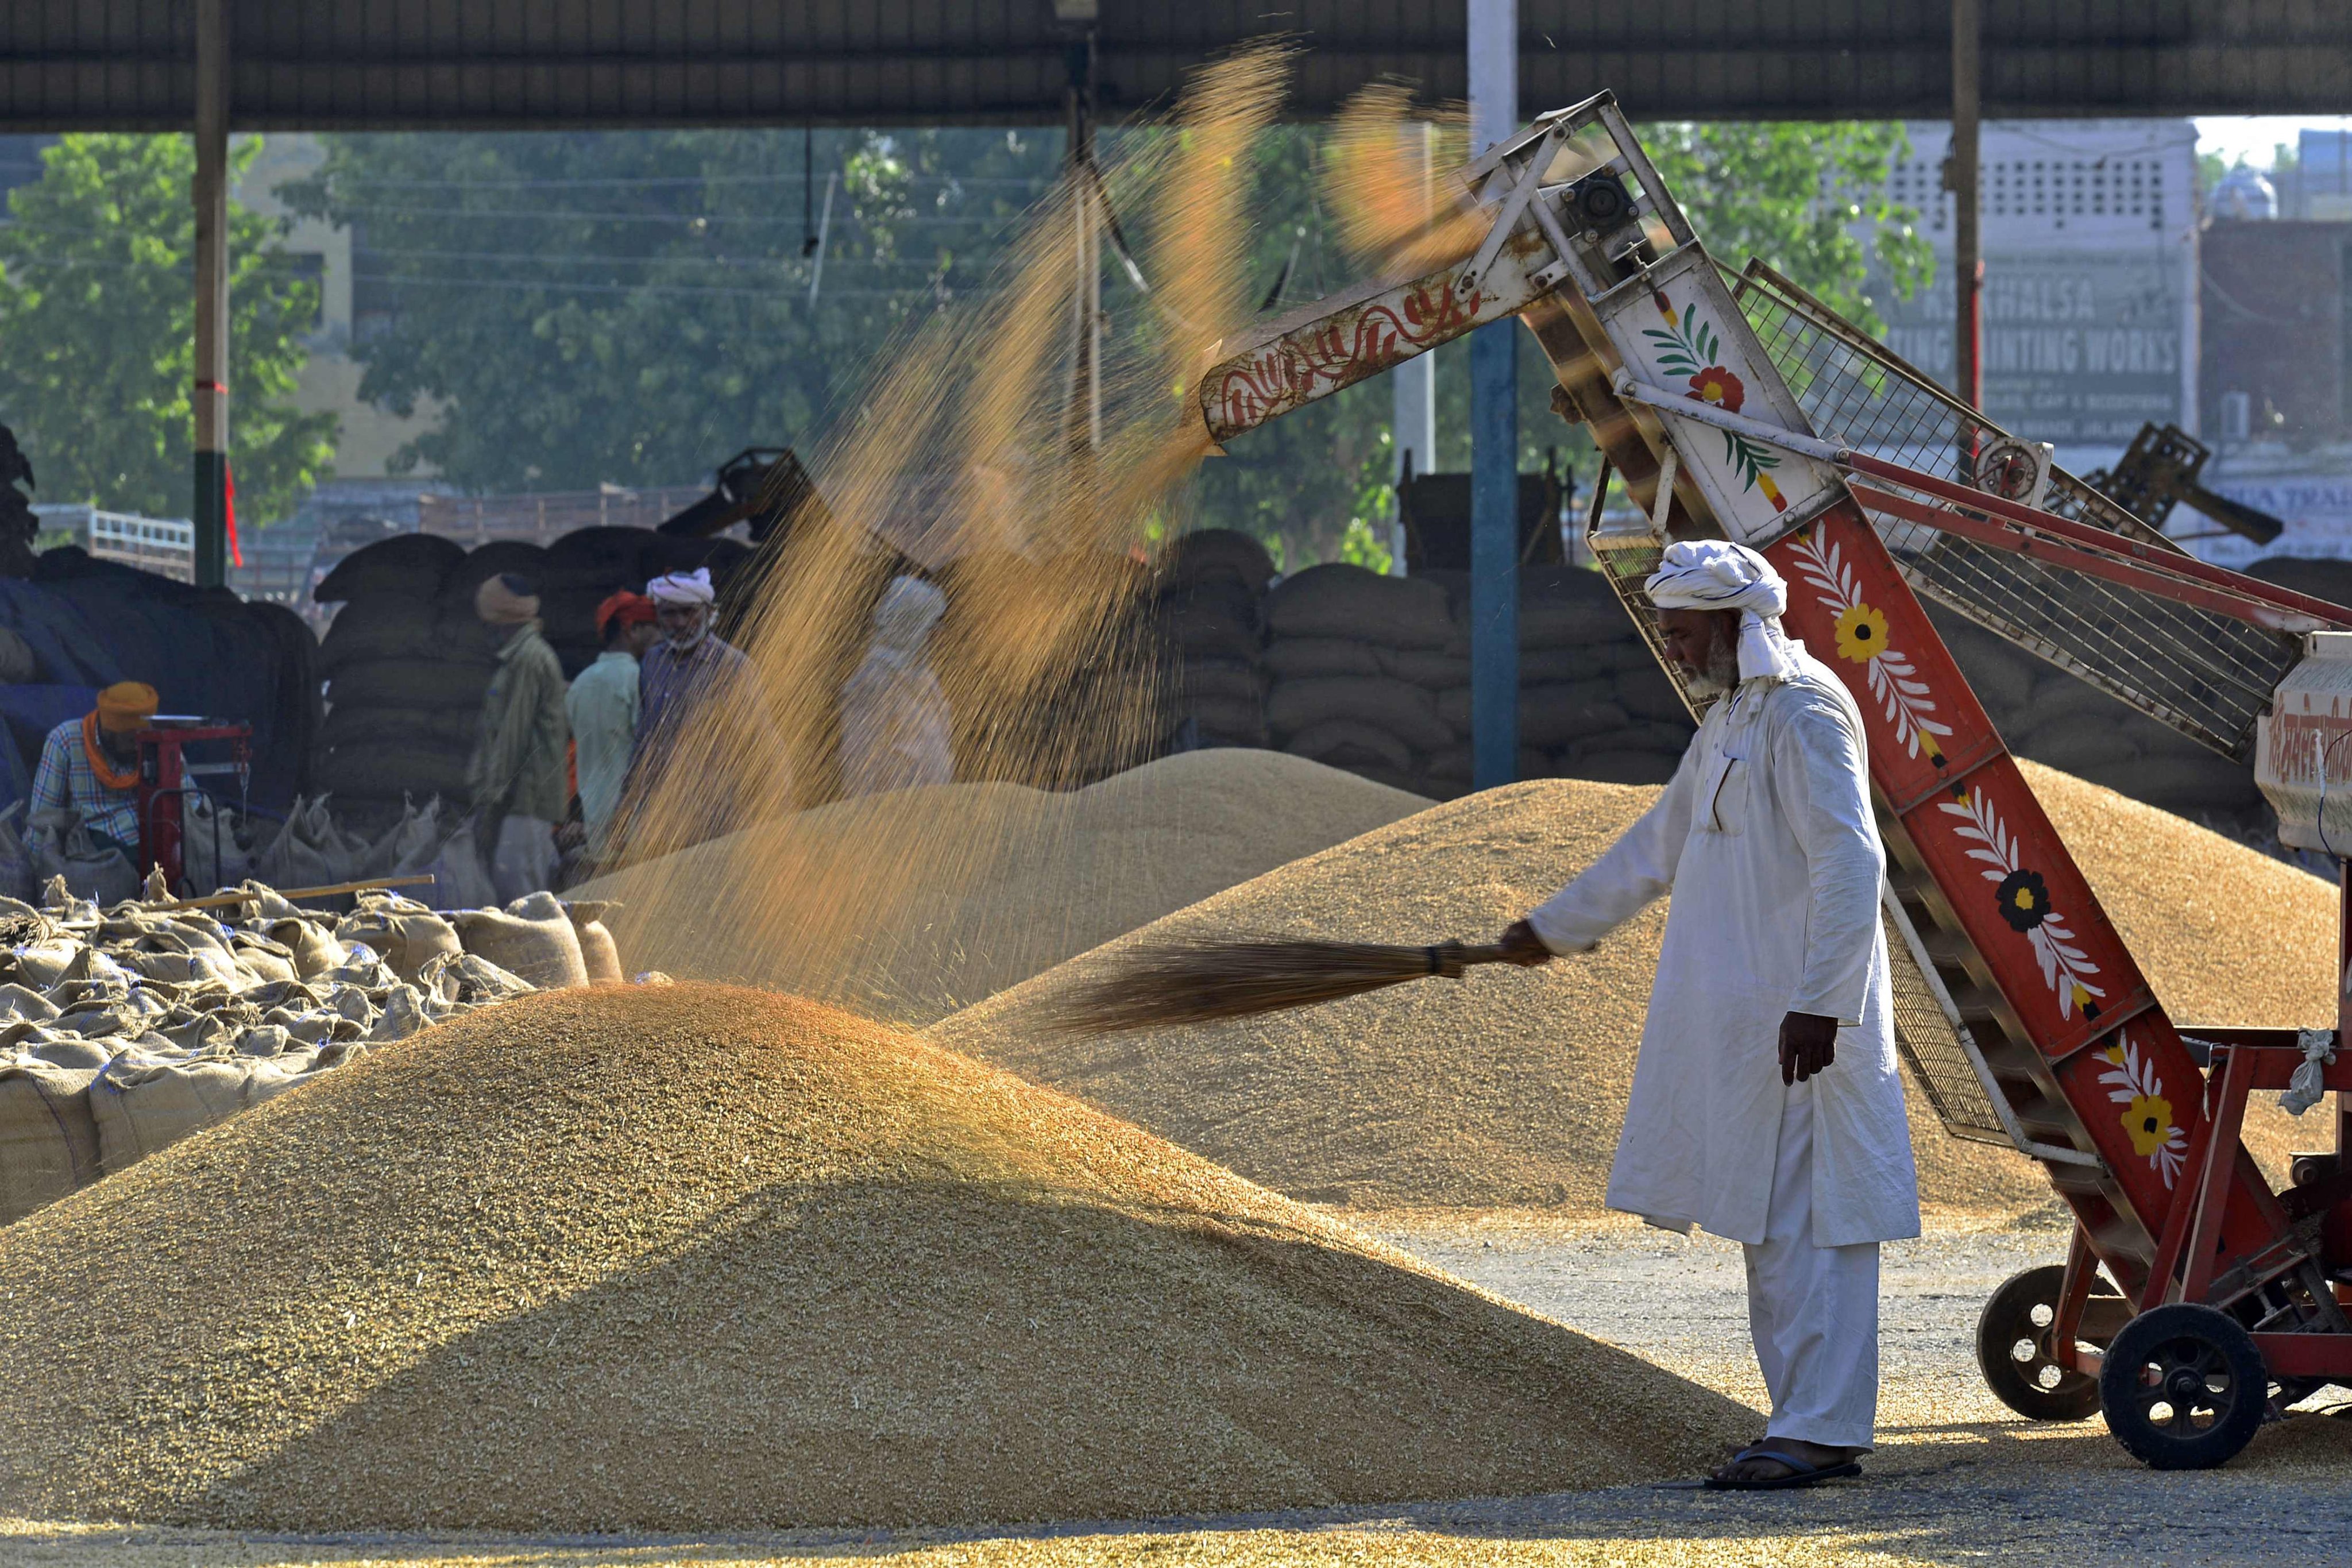 A worker spreads wheat grains for drying at a wholesale grain market in Jalandhar, India, on April 22. India’s agricultural sector, a vital employer, has underperformed, according to Nomura. Photo: AFP